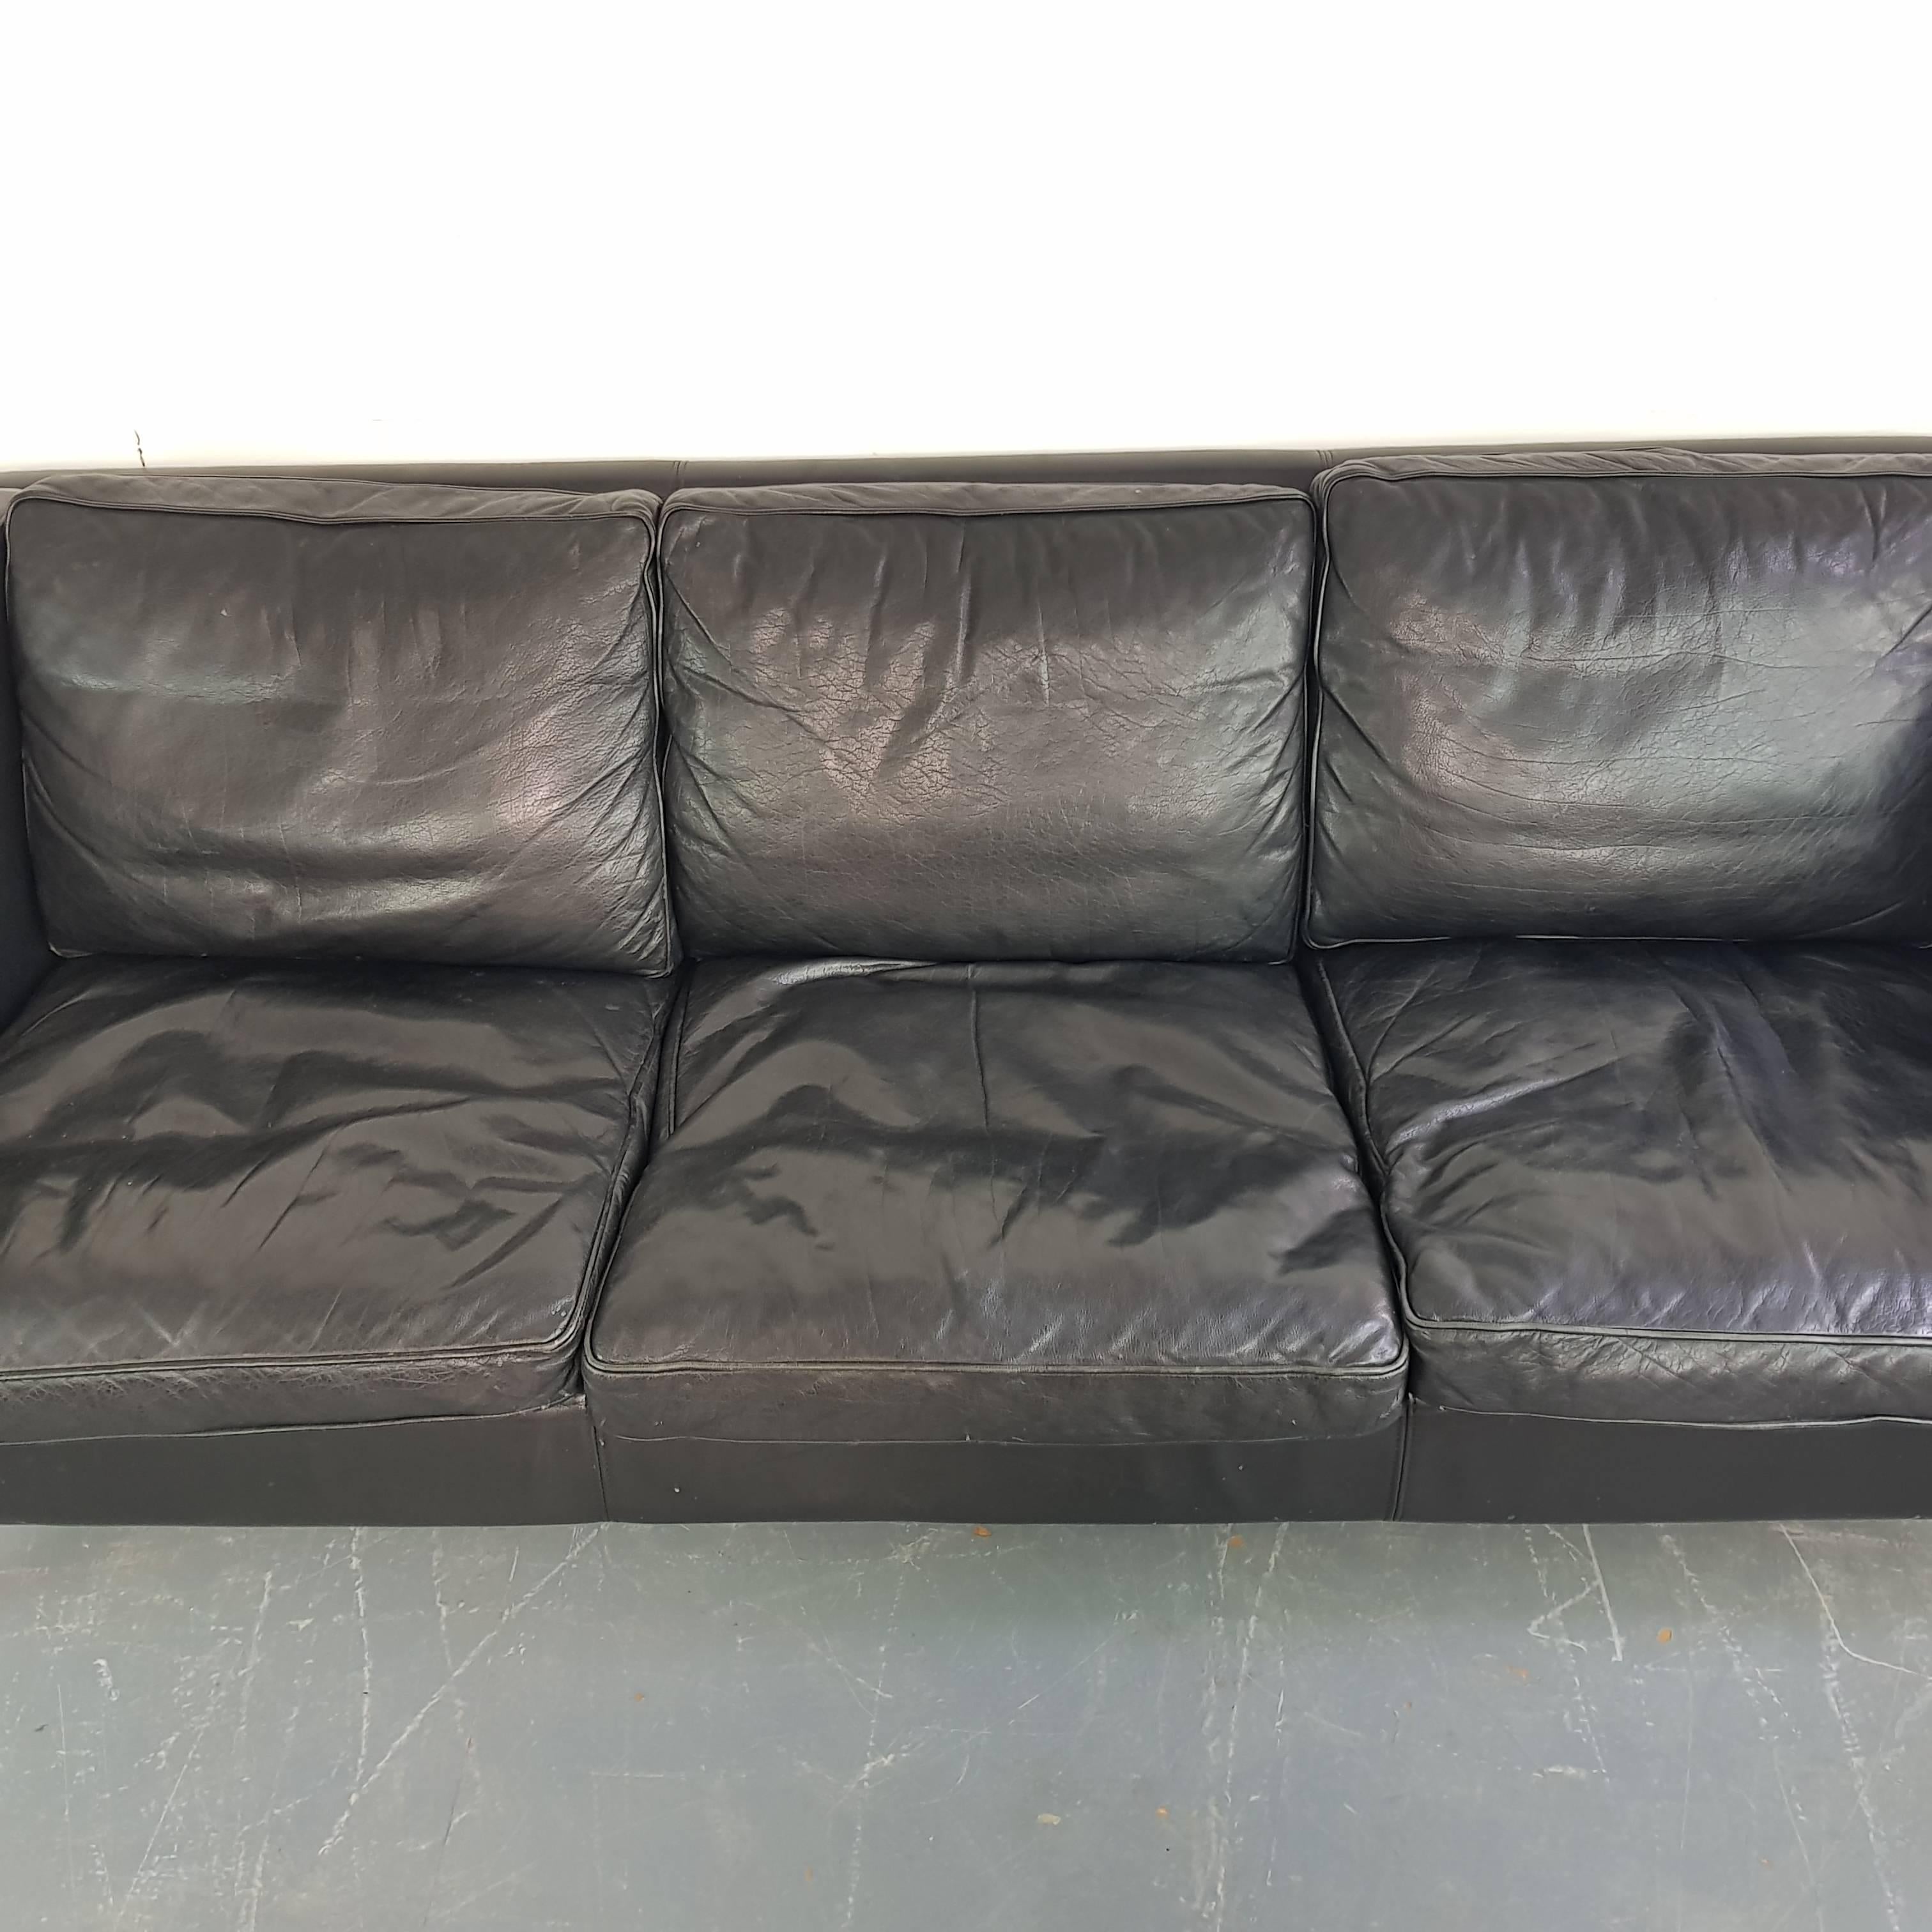 Vintage Midcentury Danish Mogensen Style Three-Seat Sofa Made by Stouby in Black In Good Condition For Sale In Lewes, East Sussex